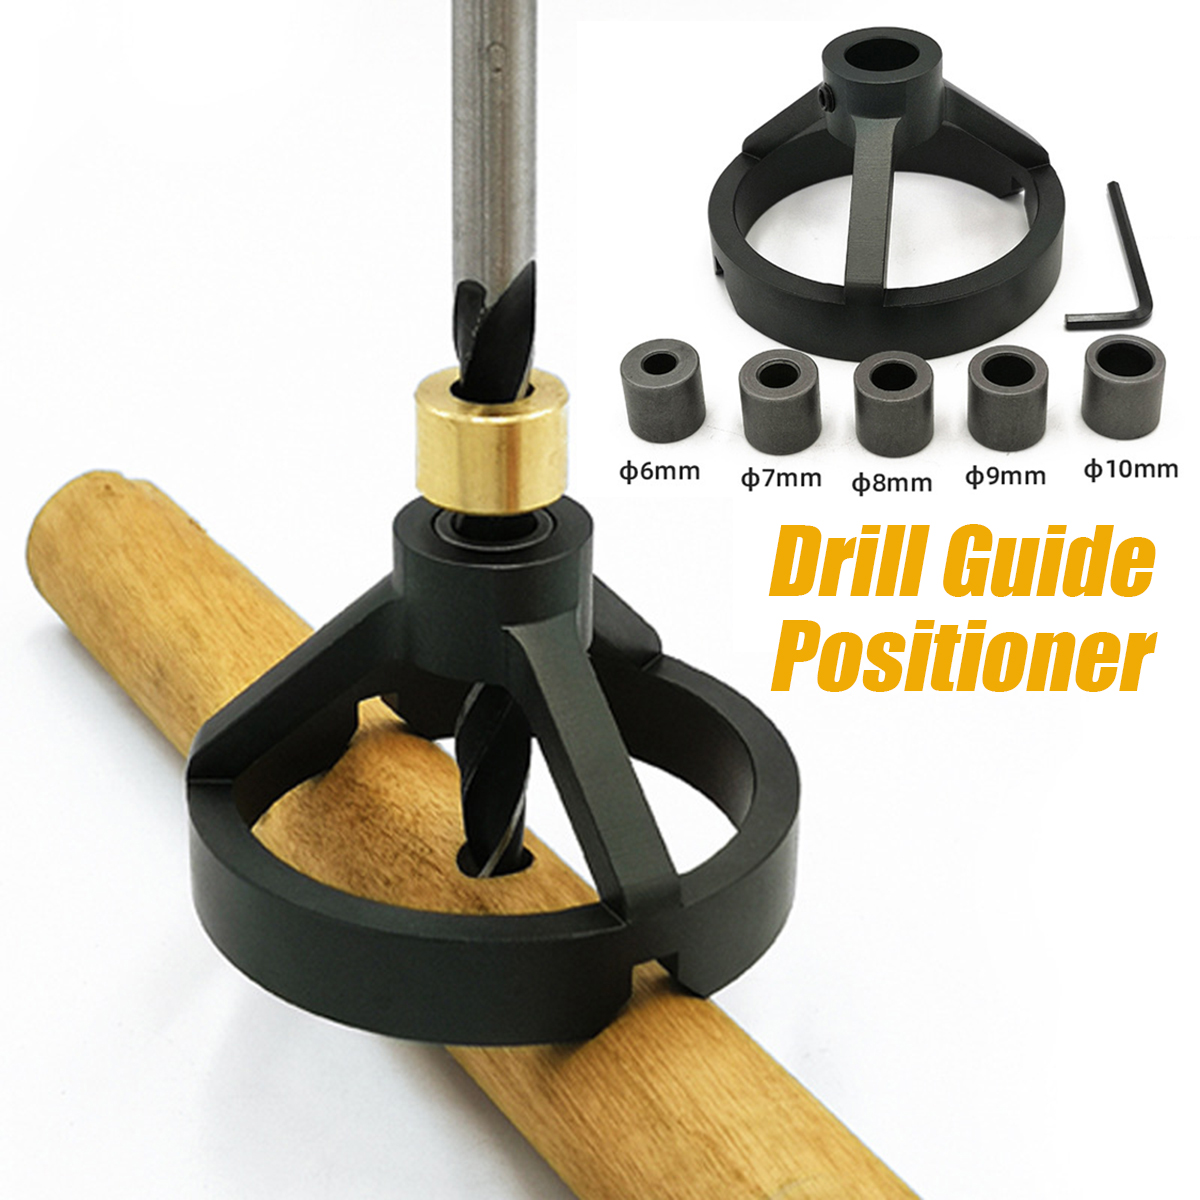 Vertical-Drill-Guide-Positioner-Straight-Carpentry-Hole-Puncher-Woodworking-Tool-1670895-2